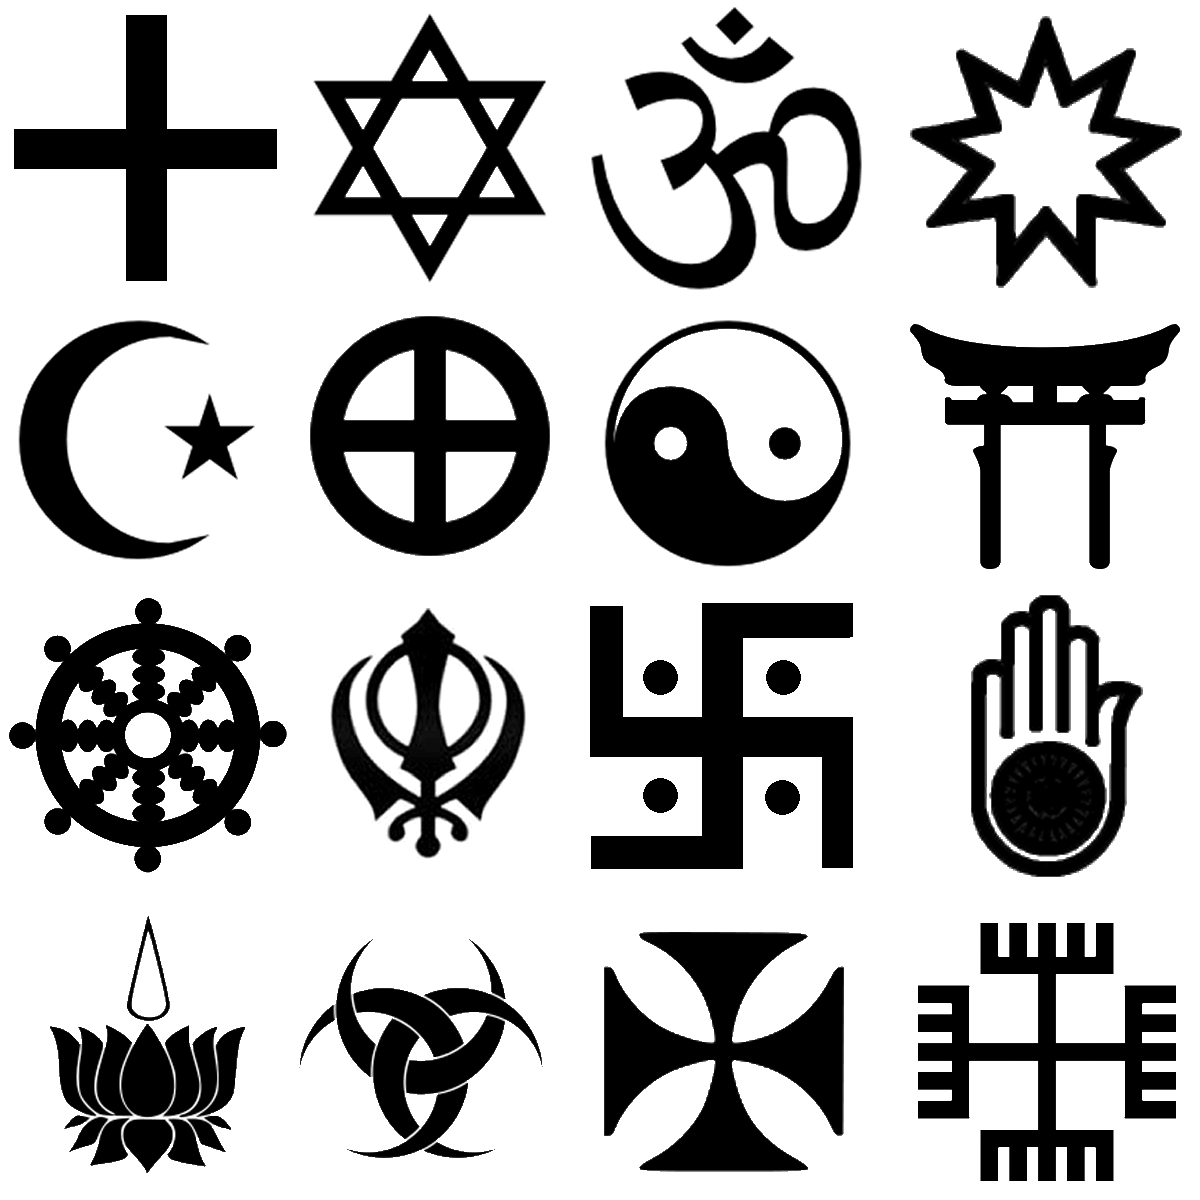 Meanings of Various Religious